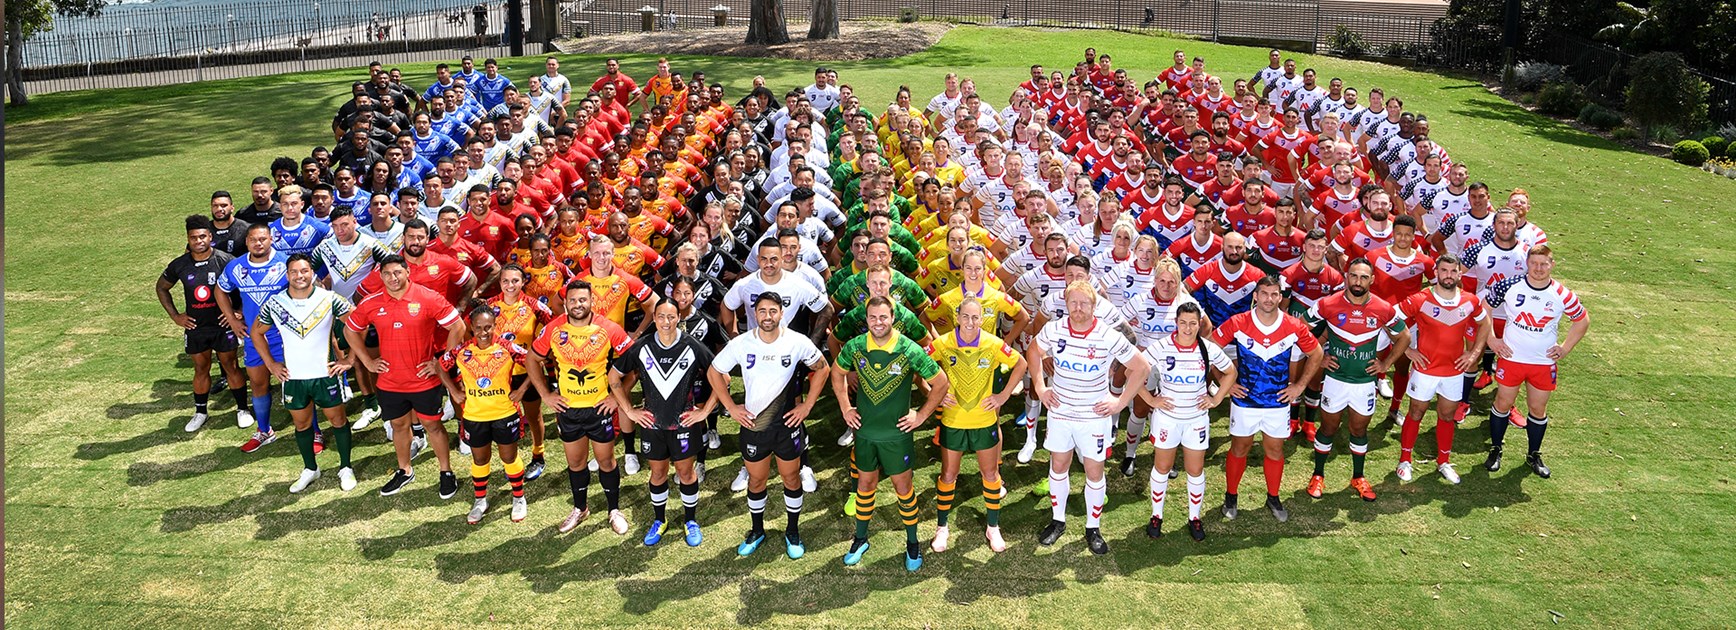 2019 World Cup Nines squads and player numbers